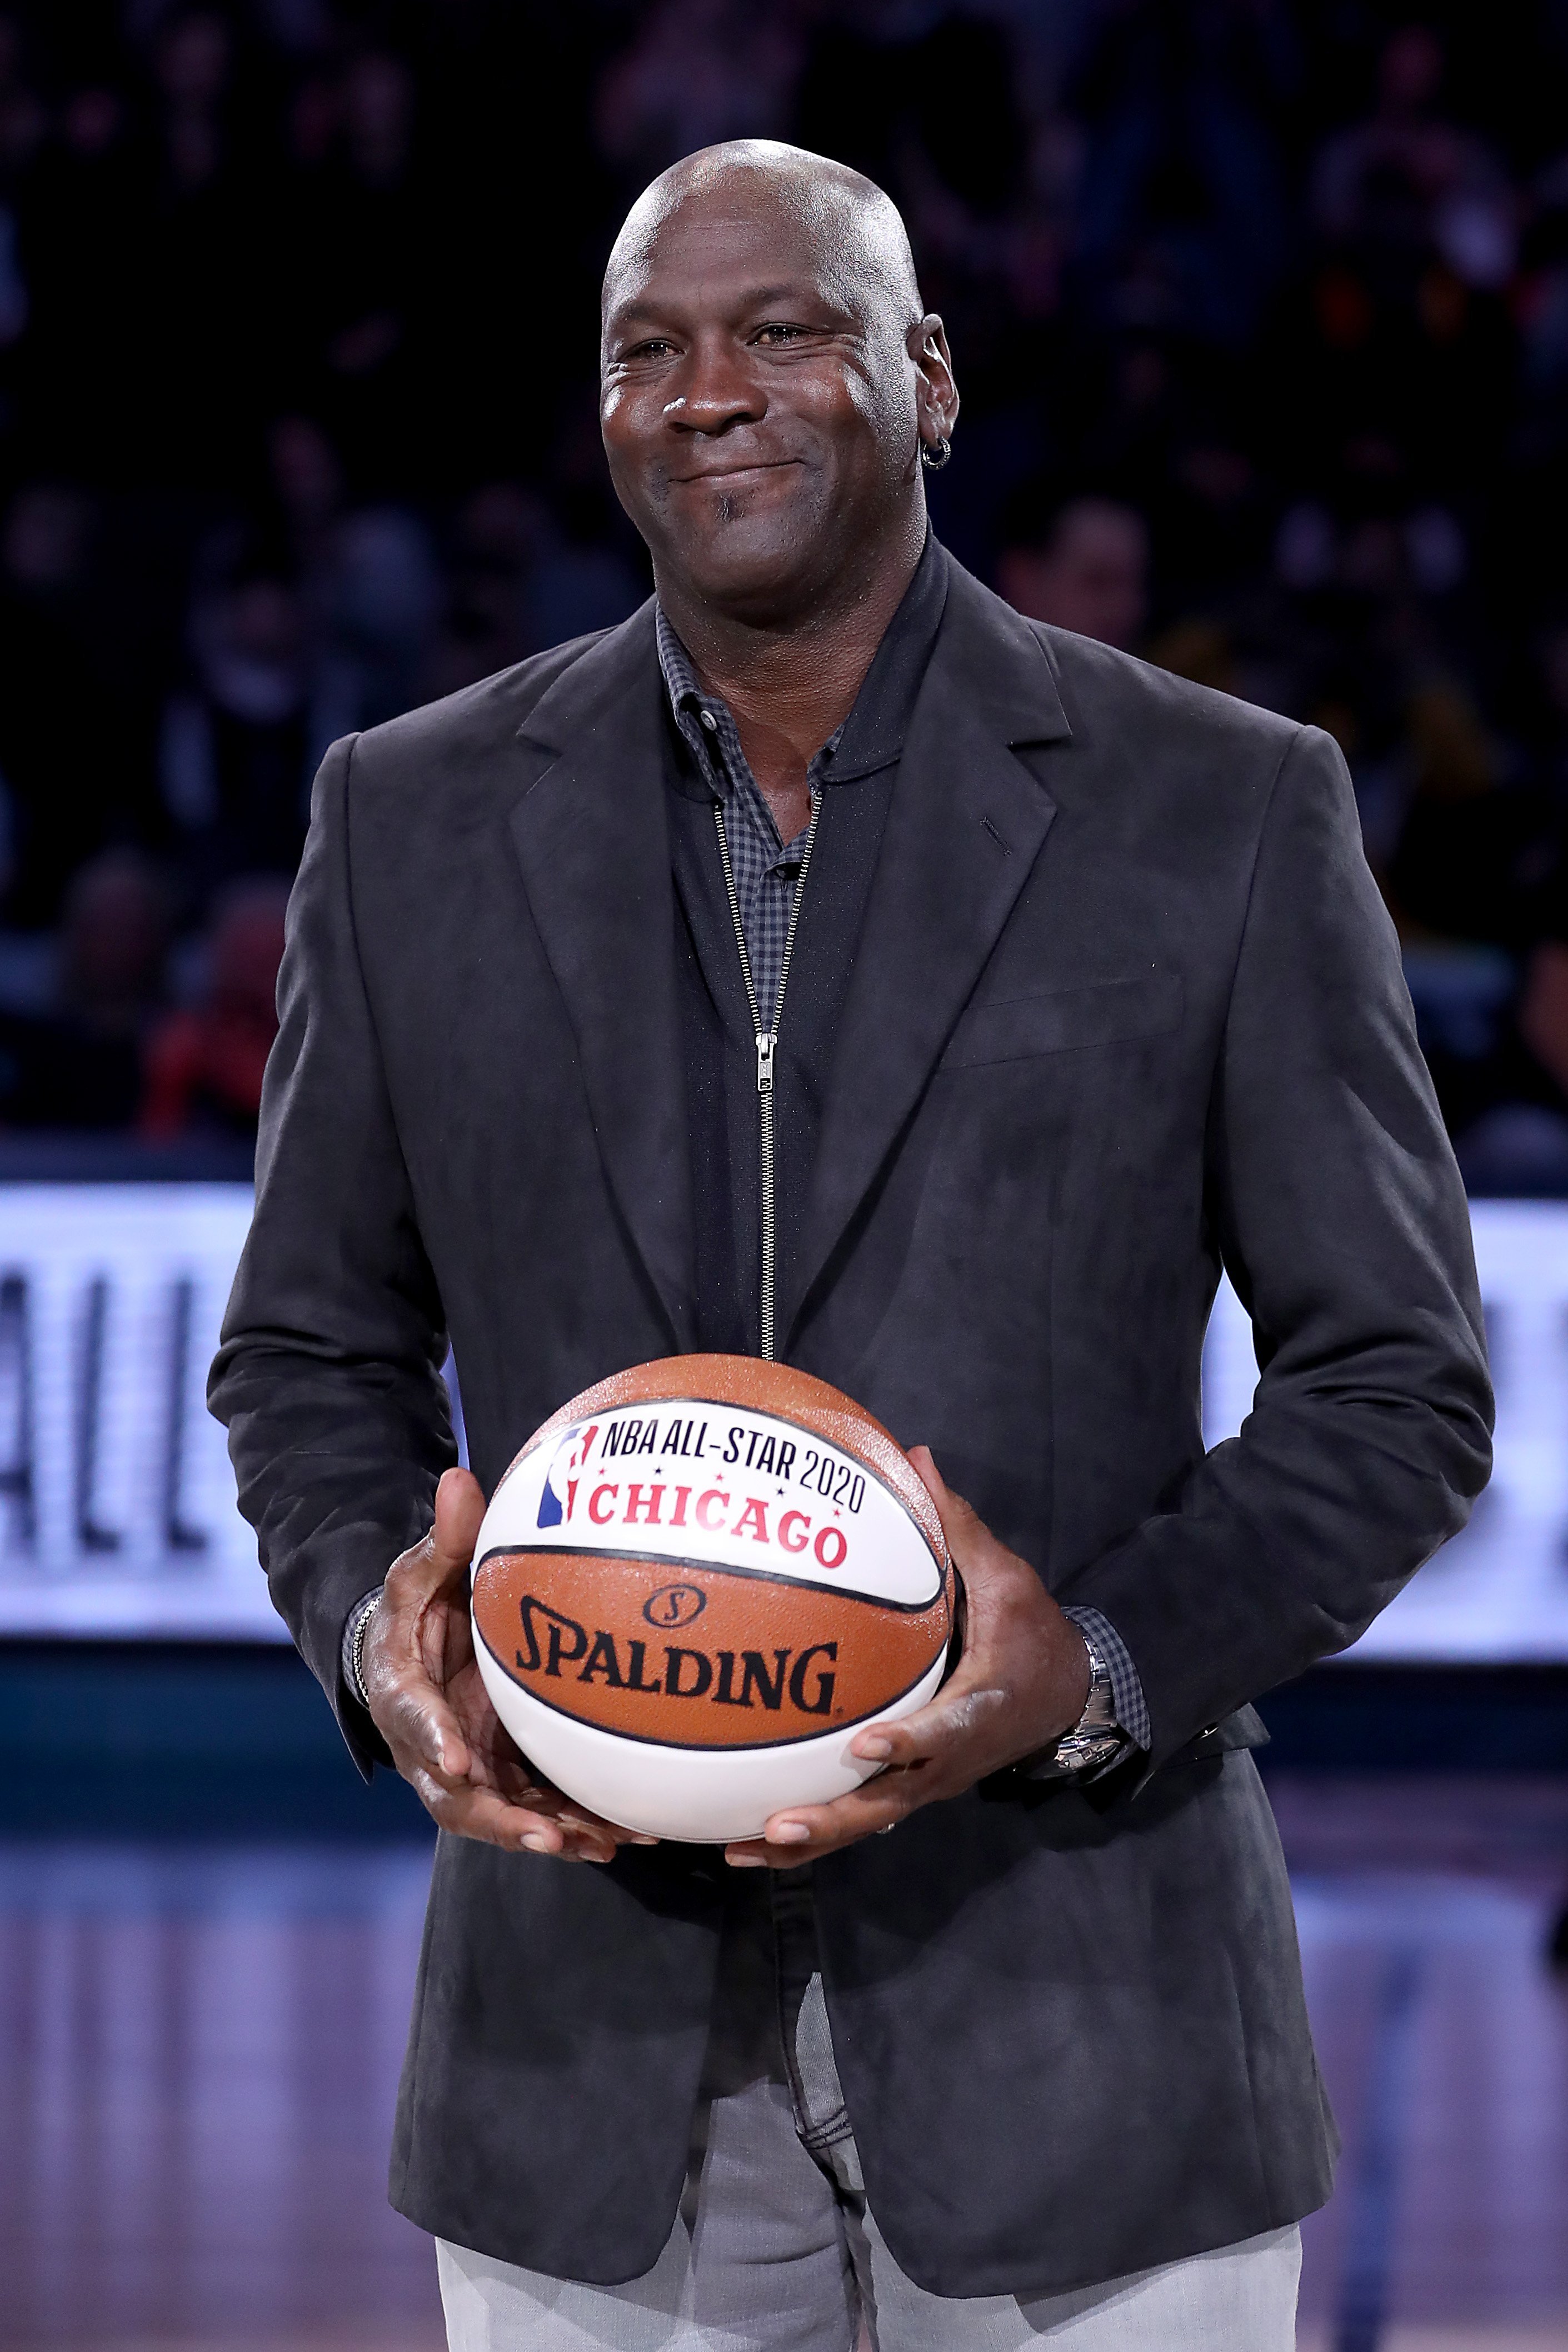 Michael Jordan taking part in a ceremony honoring the 2020 NBA All-Star game in February 2020. | Photo: Getty Images